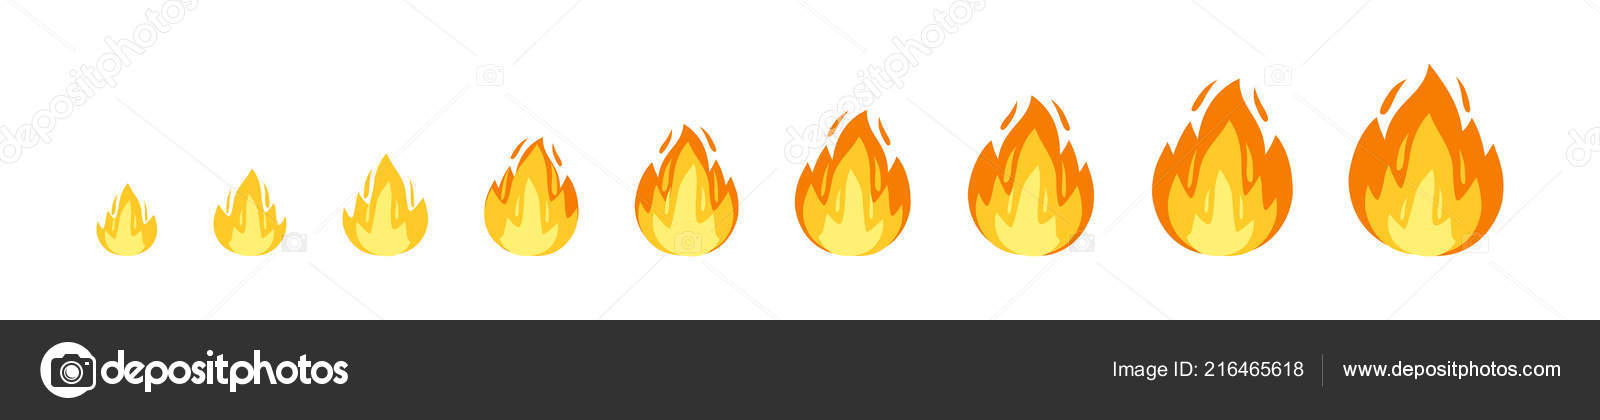 Vector fire sprites illustration for animation frames. Use in game